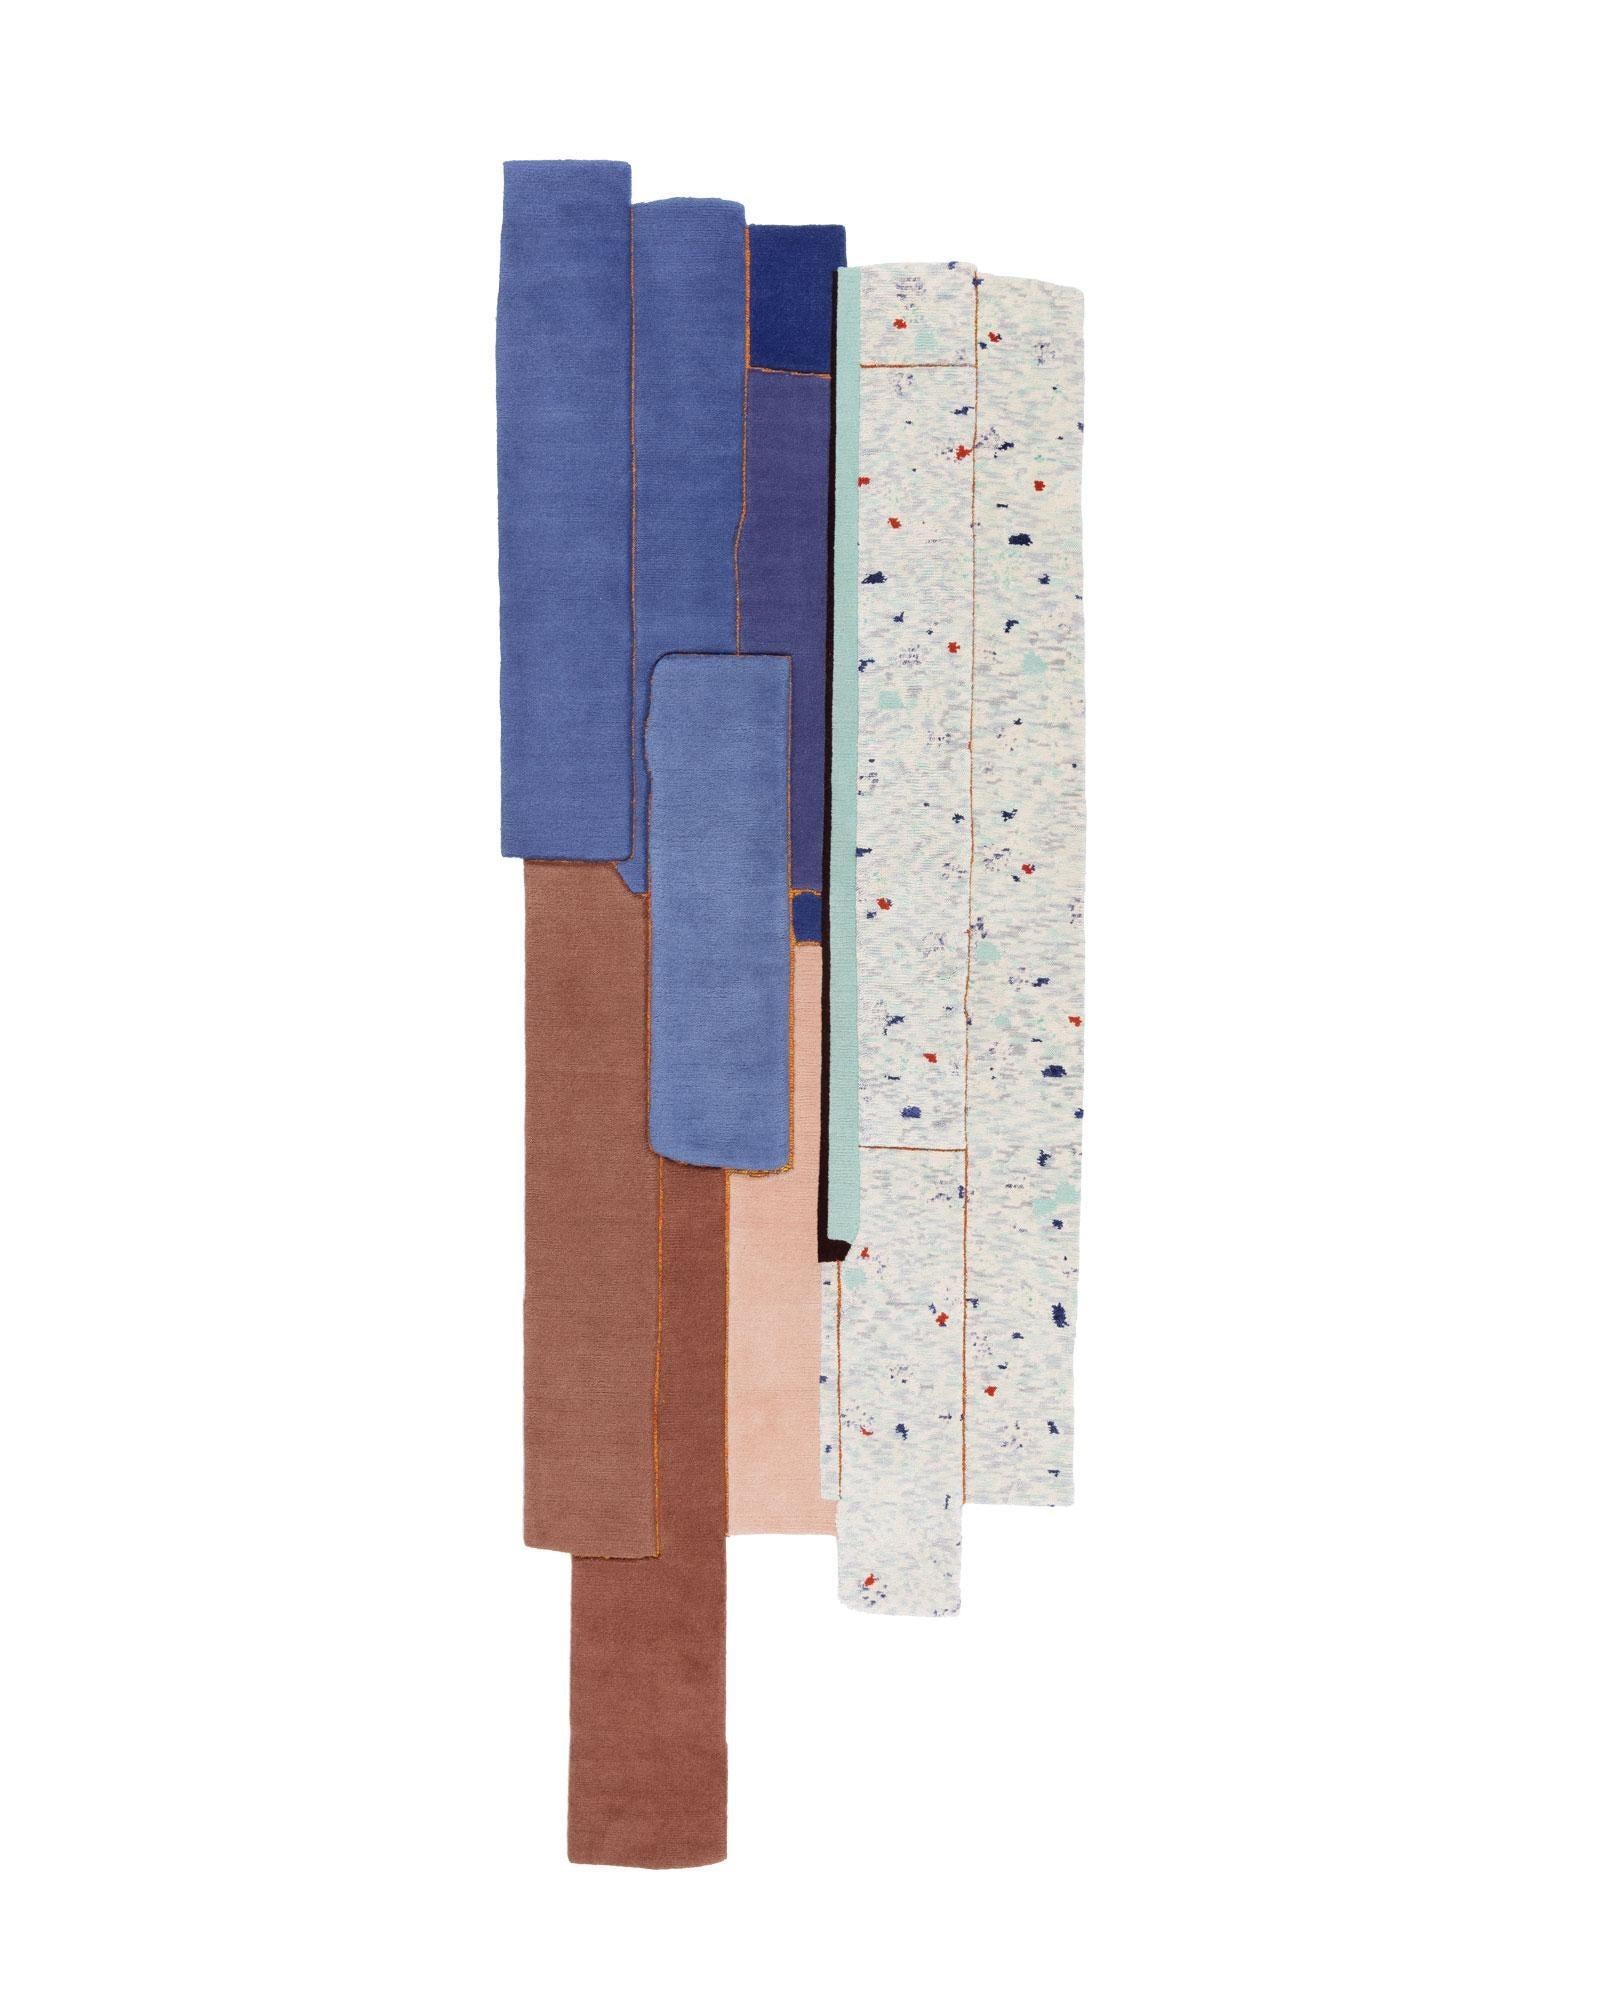 Modern cc-tapis Patcha Runner Handmade Standard Rug by Patricia Urquiola - IN STOCK For Sale